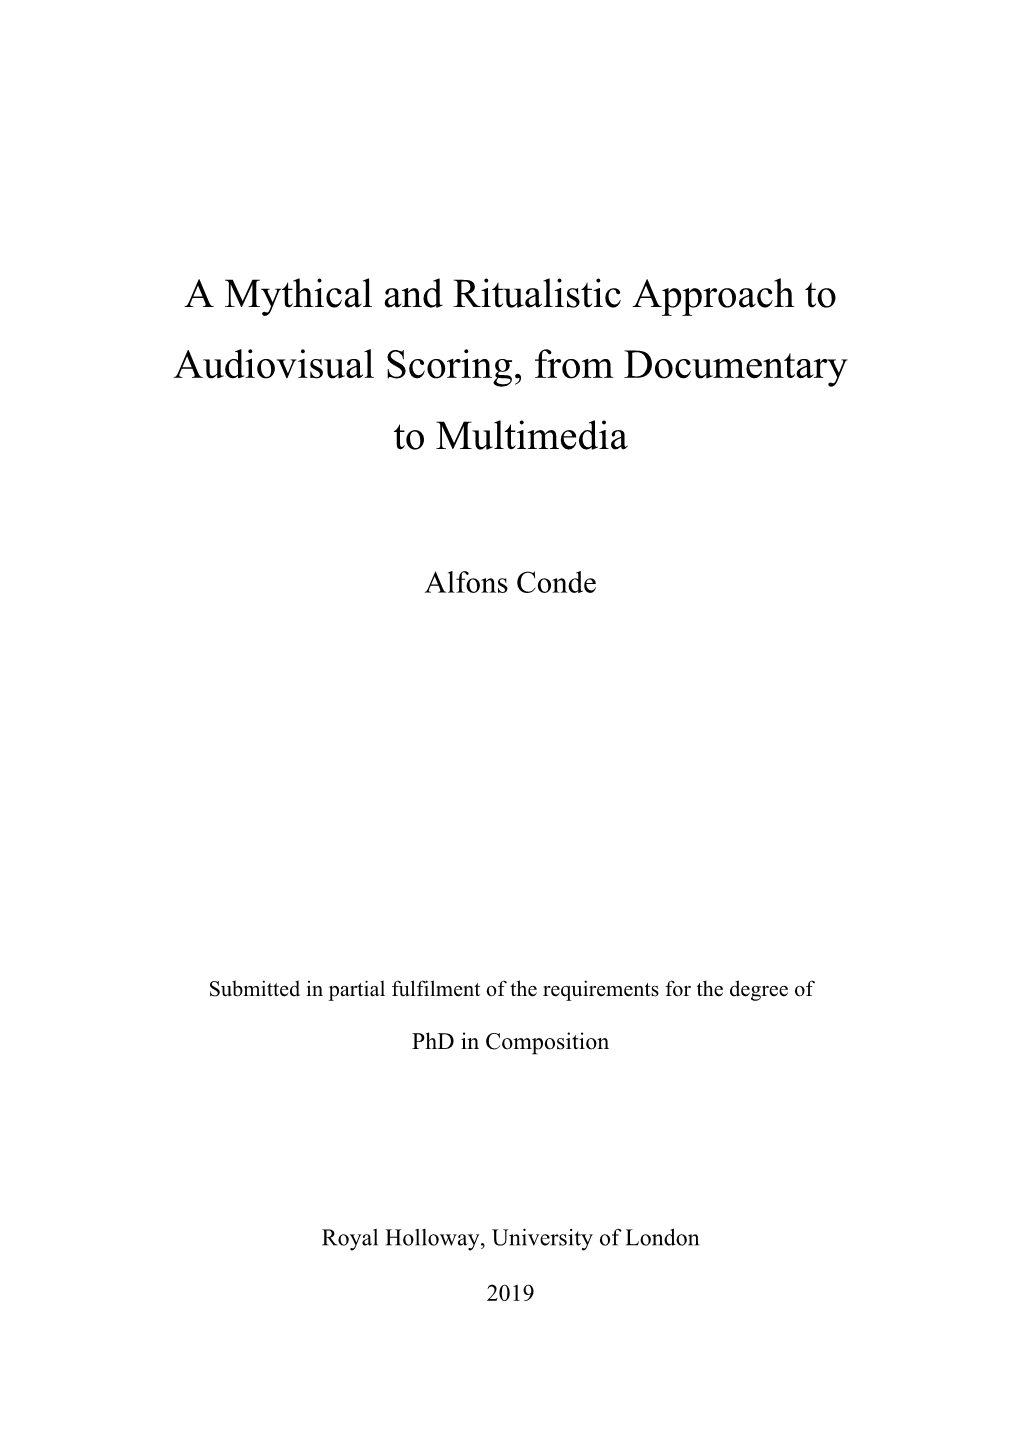 A Mythical and Ritualistic Approach to Audiovisual Scoring, from Documentary to Multimedia